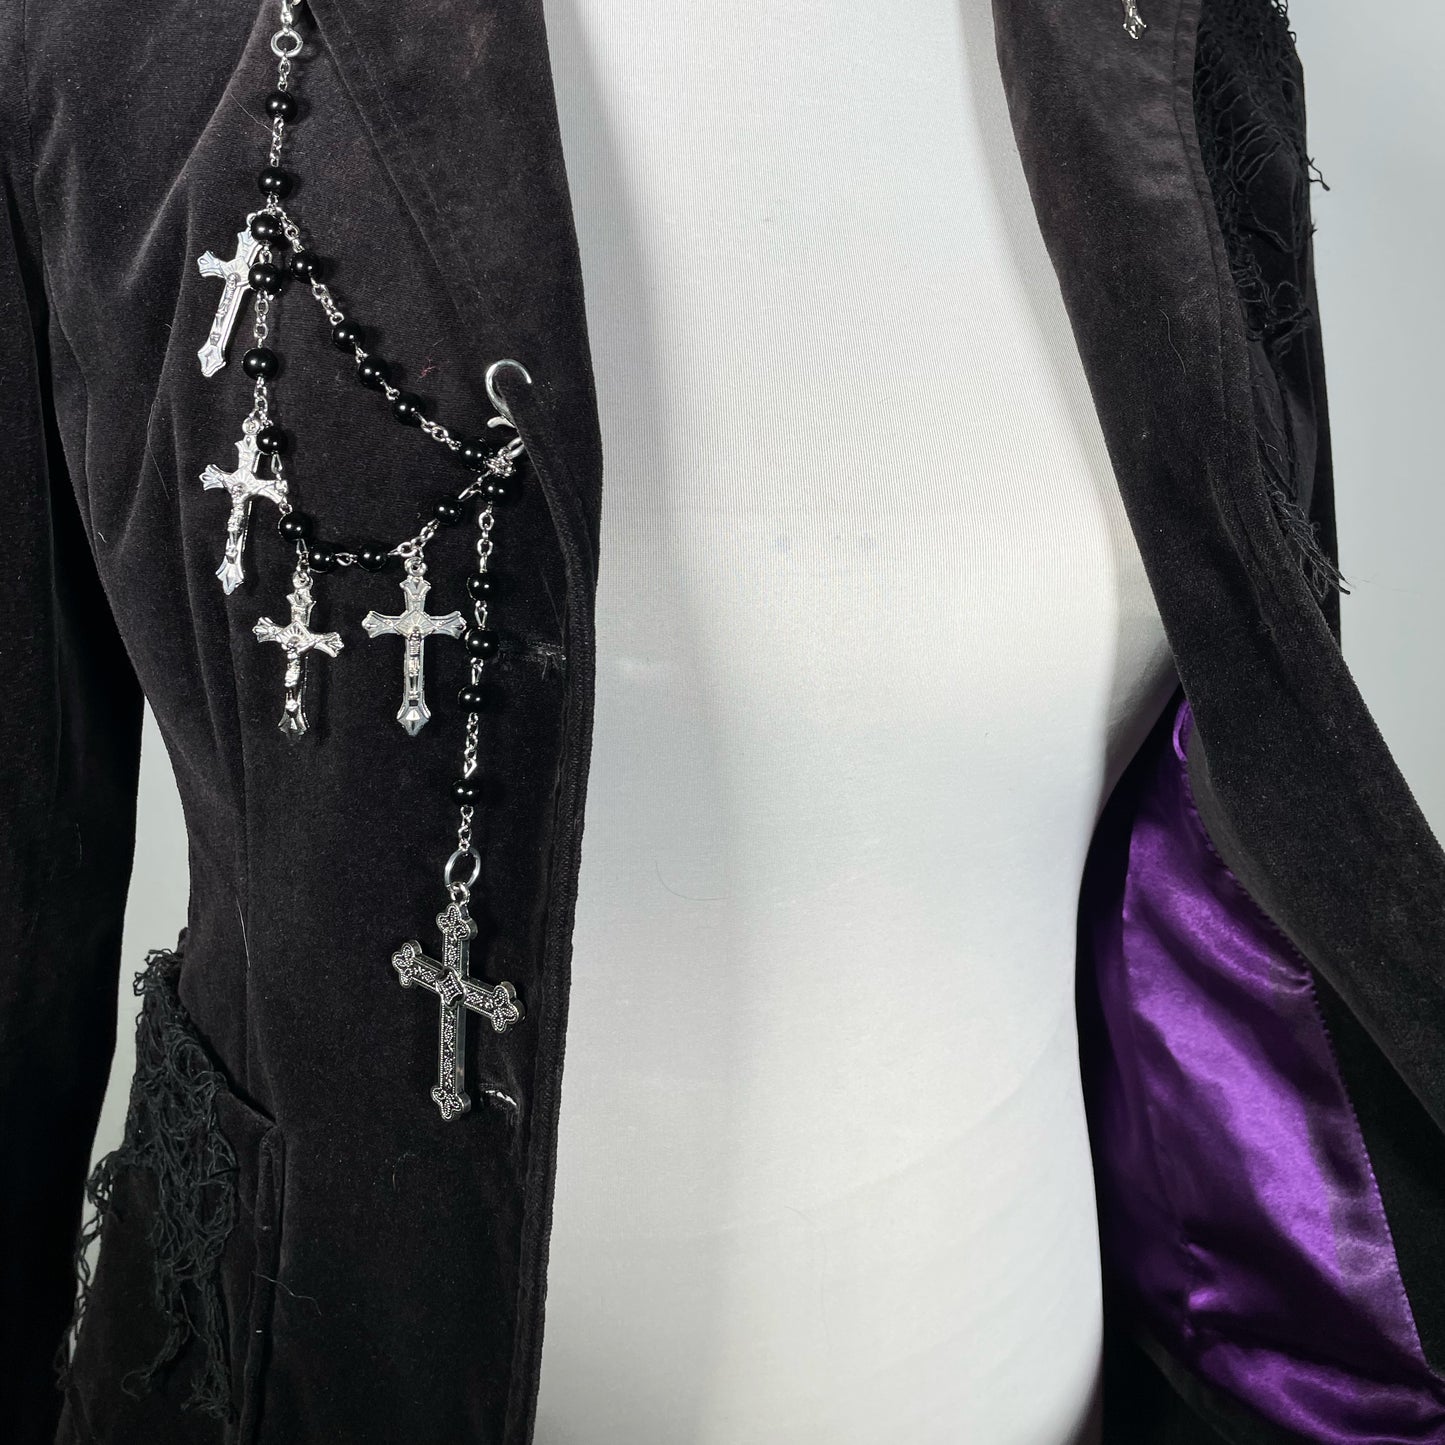 Black Velvet Blazer with Rosary Chain with Crosses and Cobwebs